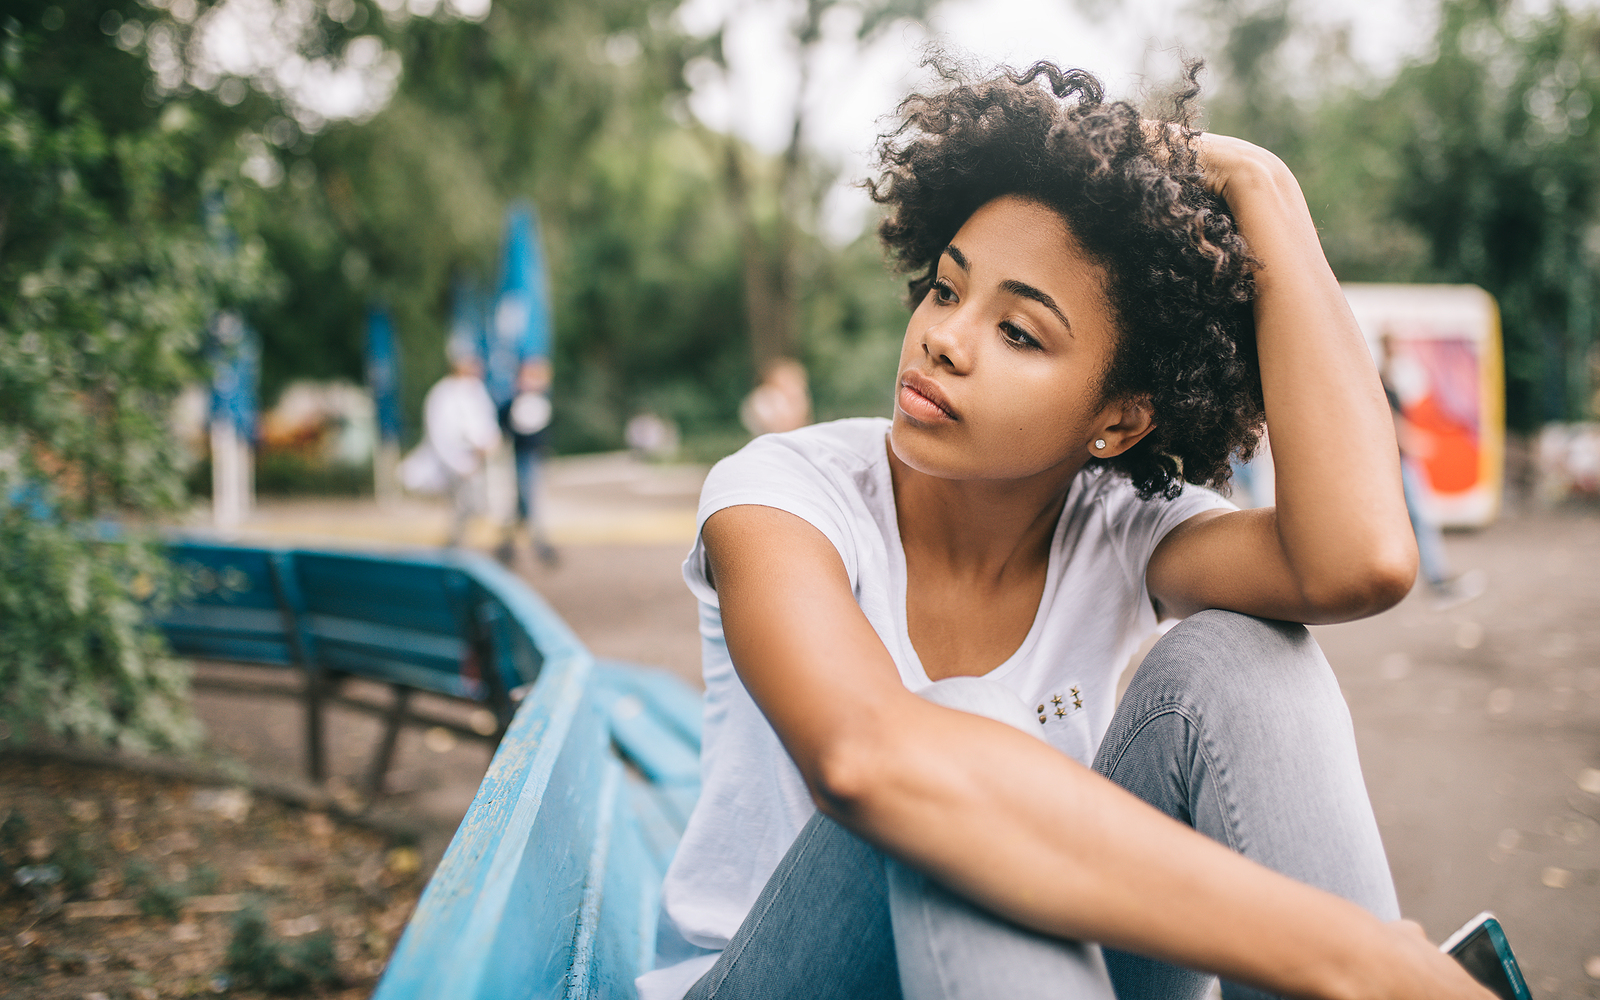 A young black woman with curly hair sits alone on a bench looking to her side contemplative.